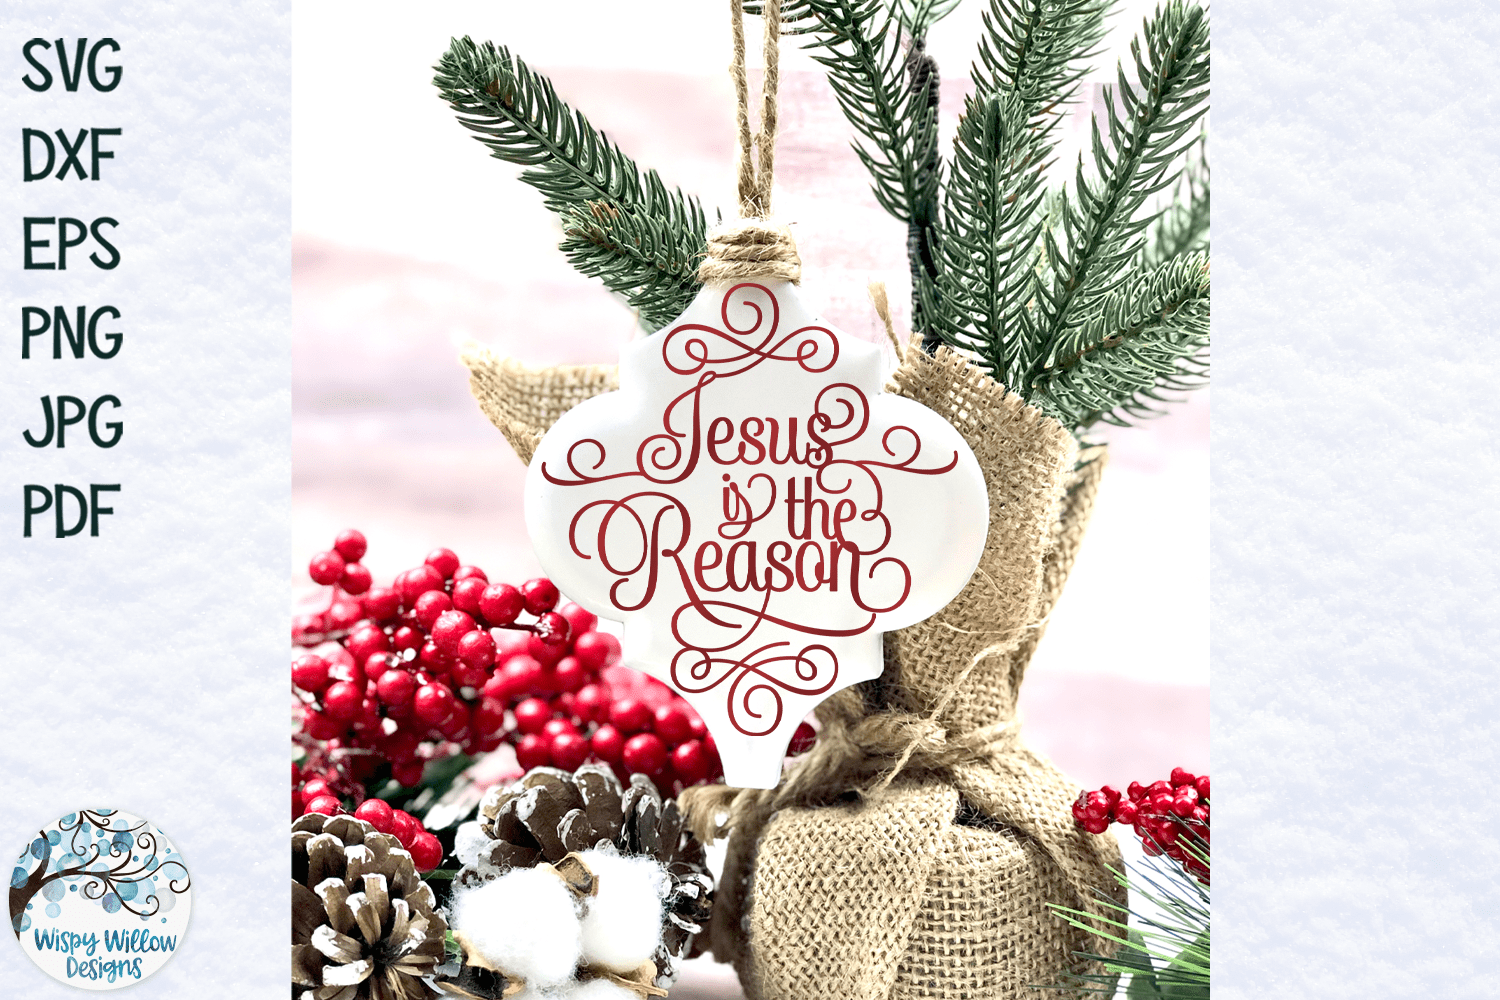 Jesus Is The Reason Arabesque Ornament SVG | Christmas Ornaments Wispy Willow Designs Company